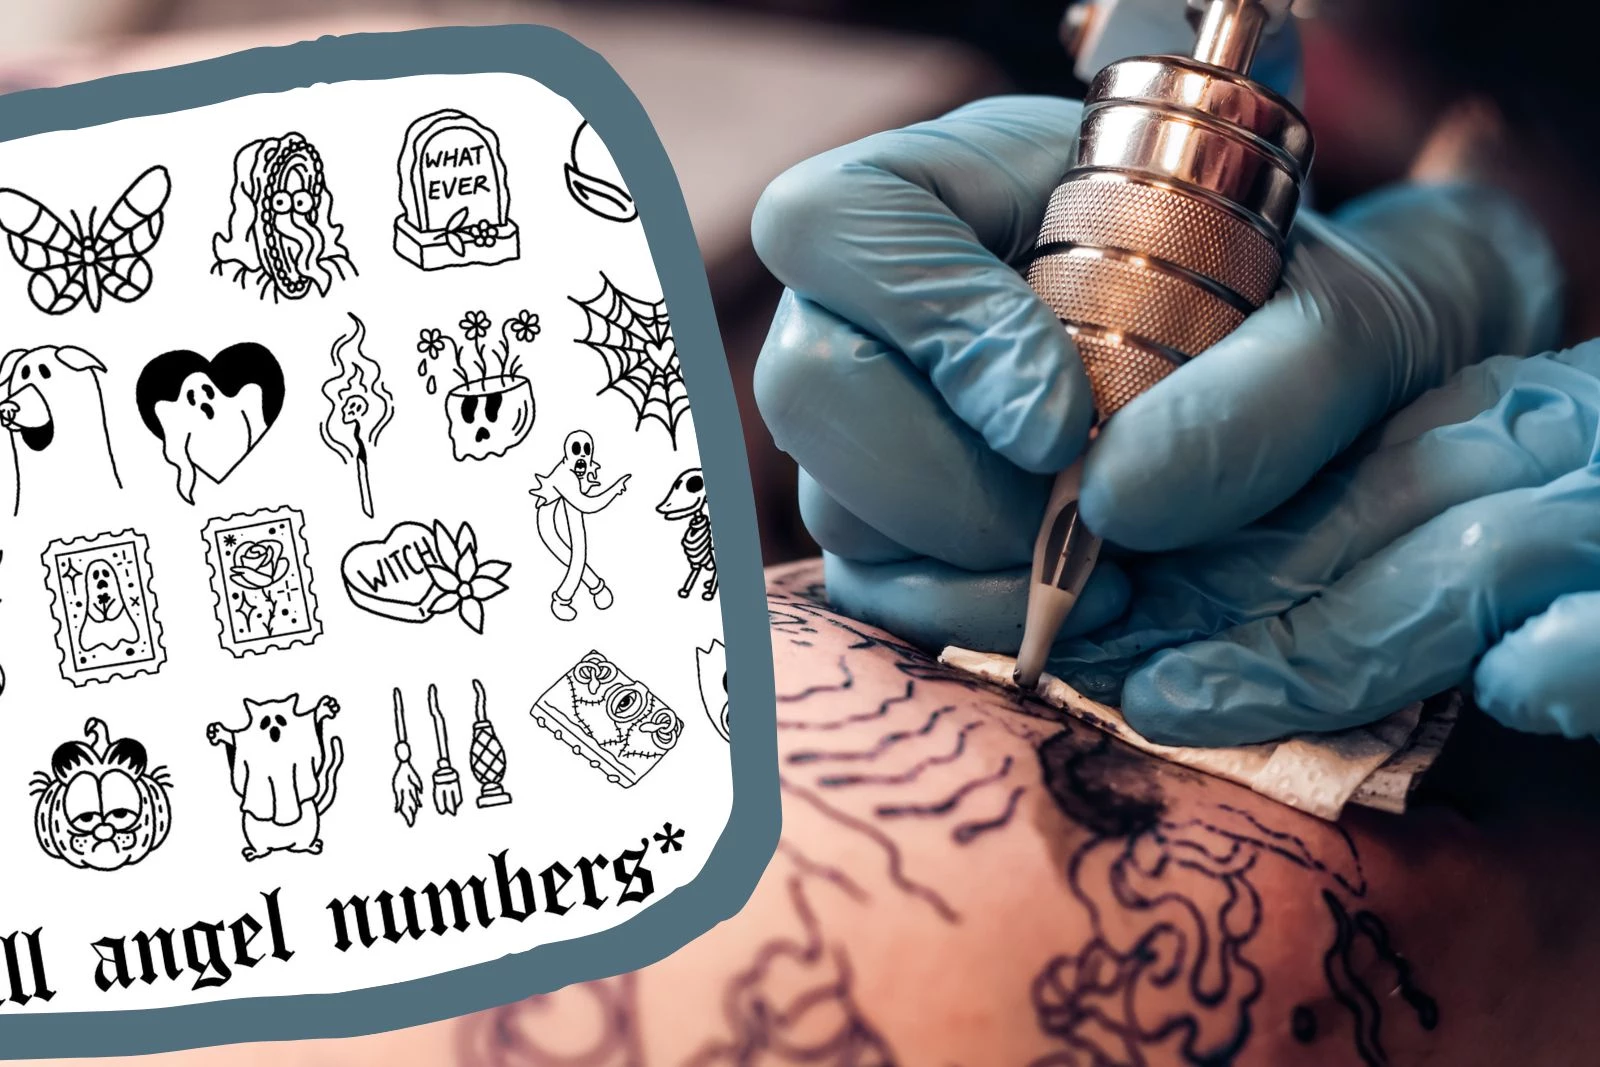 Incorporating Artificial Intelligence into Tattoo Art: Darwin Enriquez  Talks About the AI Image Generator - Darwin Enriquez | Best Tattoo Artist  in NYC